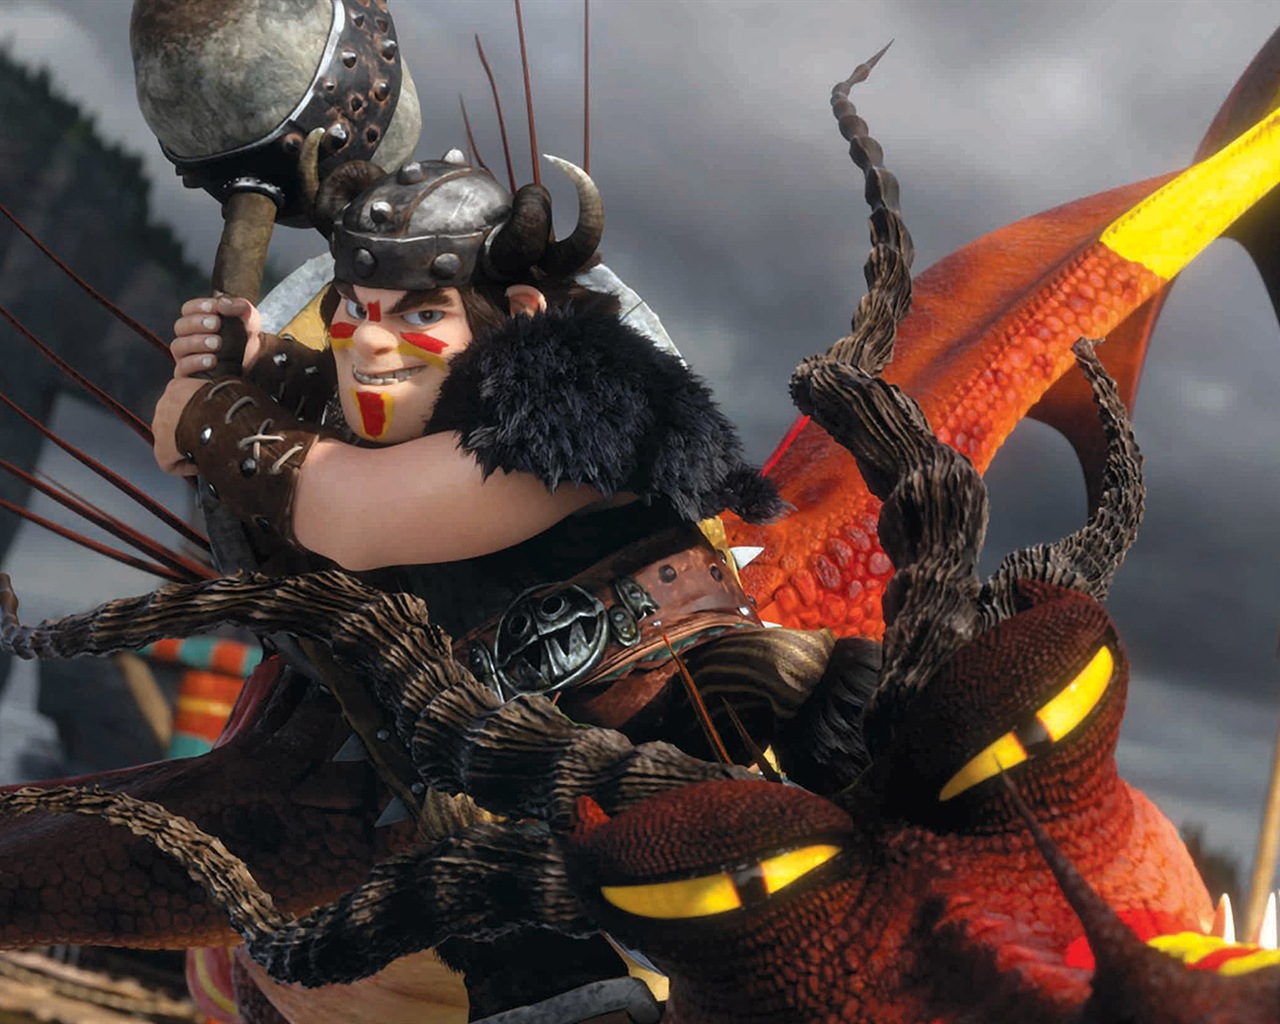 How to Train Your Dragon 2 驯龙高手2 高清壁纸12 - 1280x1024